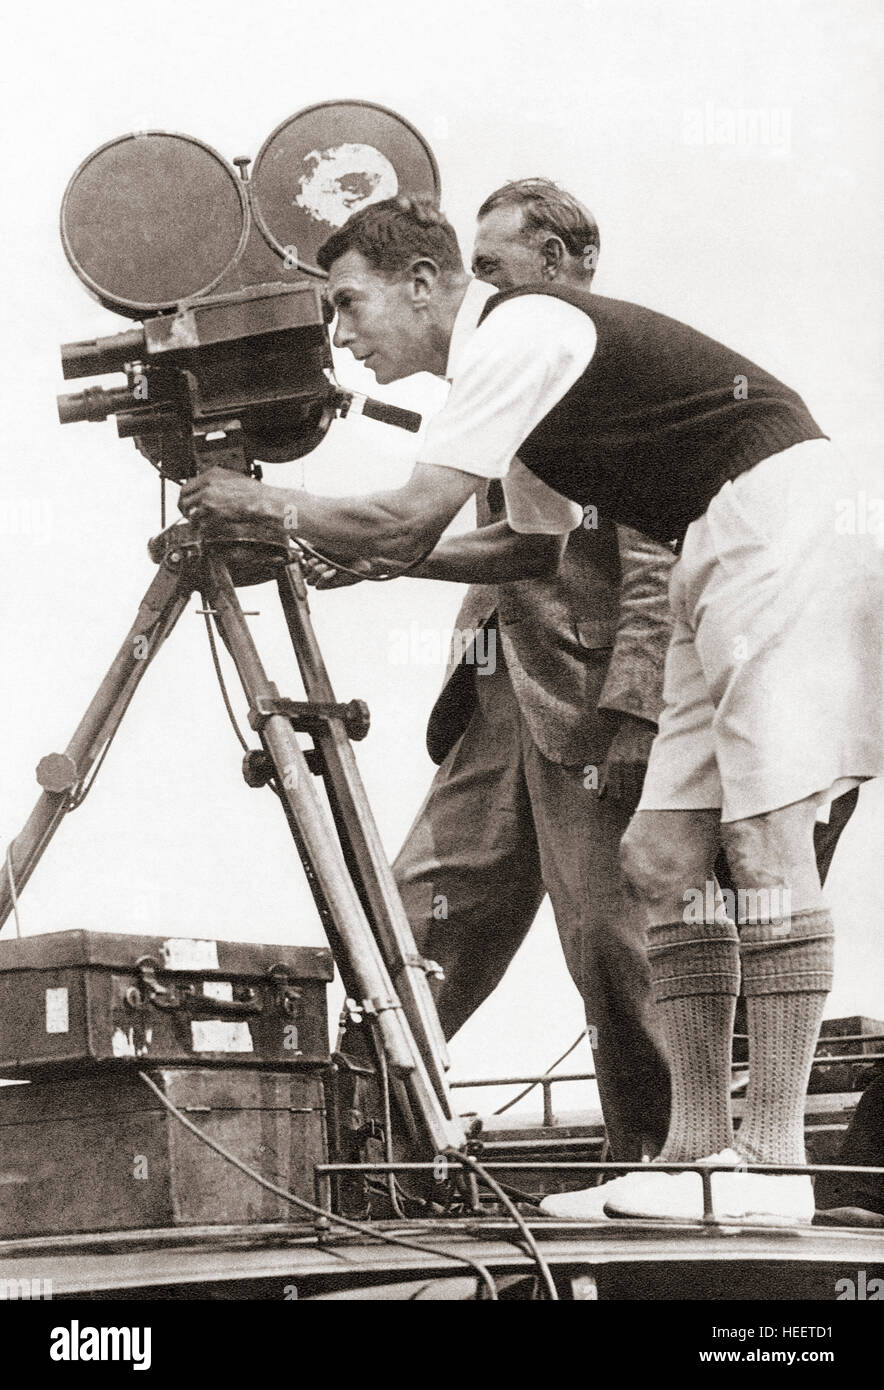 The Duke of York, future King George VI, seen here making a film at one of his annual camps for boys. George VI, 1895 –1952.  King of the United Kingdom and the Dominions of the British Commonwealth. Stock Photo